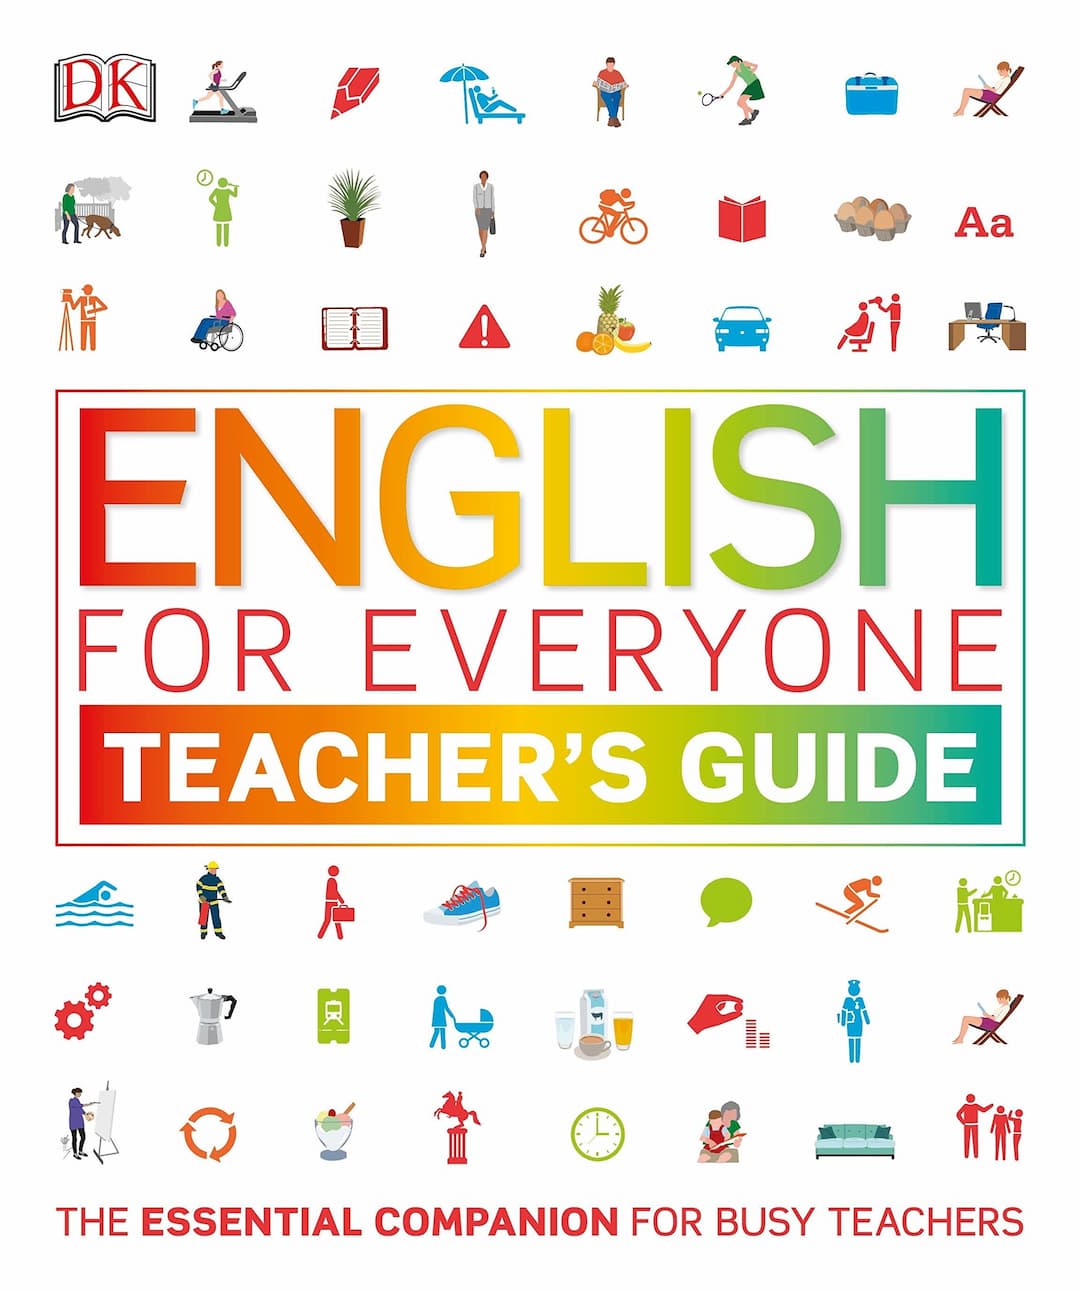 PDF) ENGLISH LANGUAGE GUIDE FOR BEGINNERS